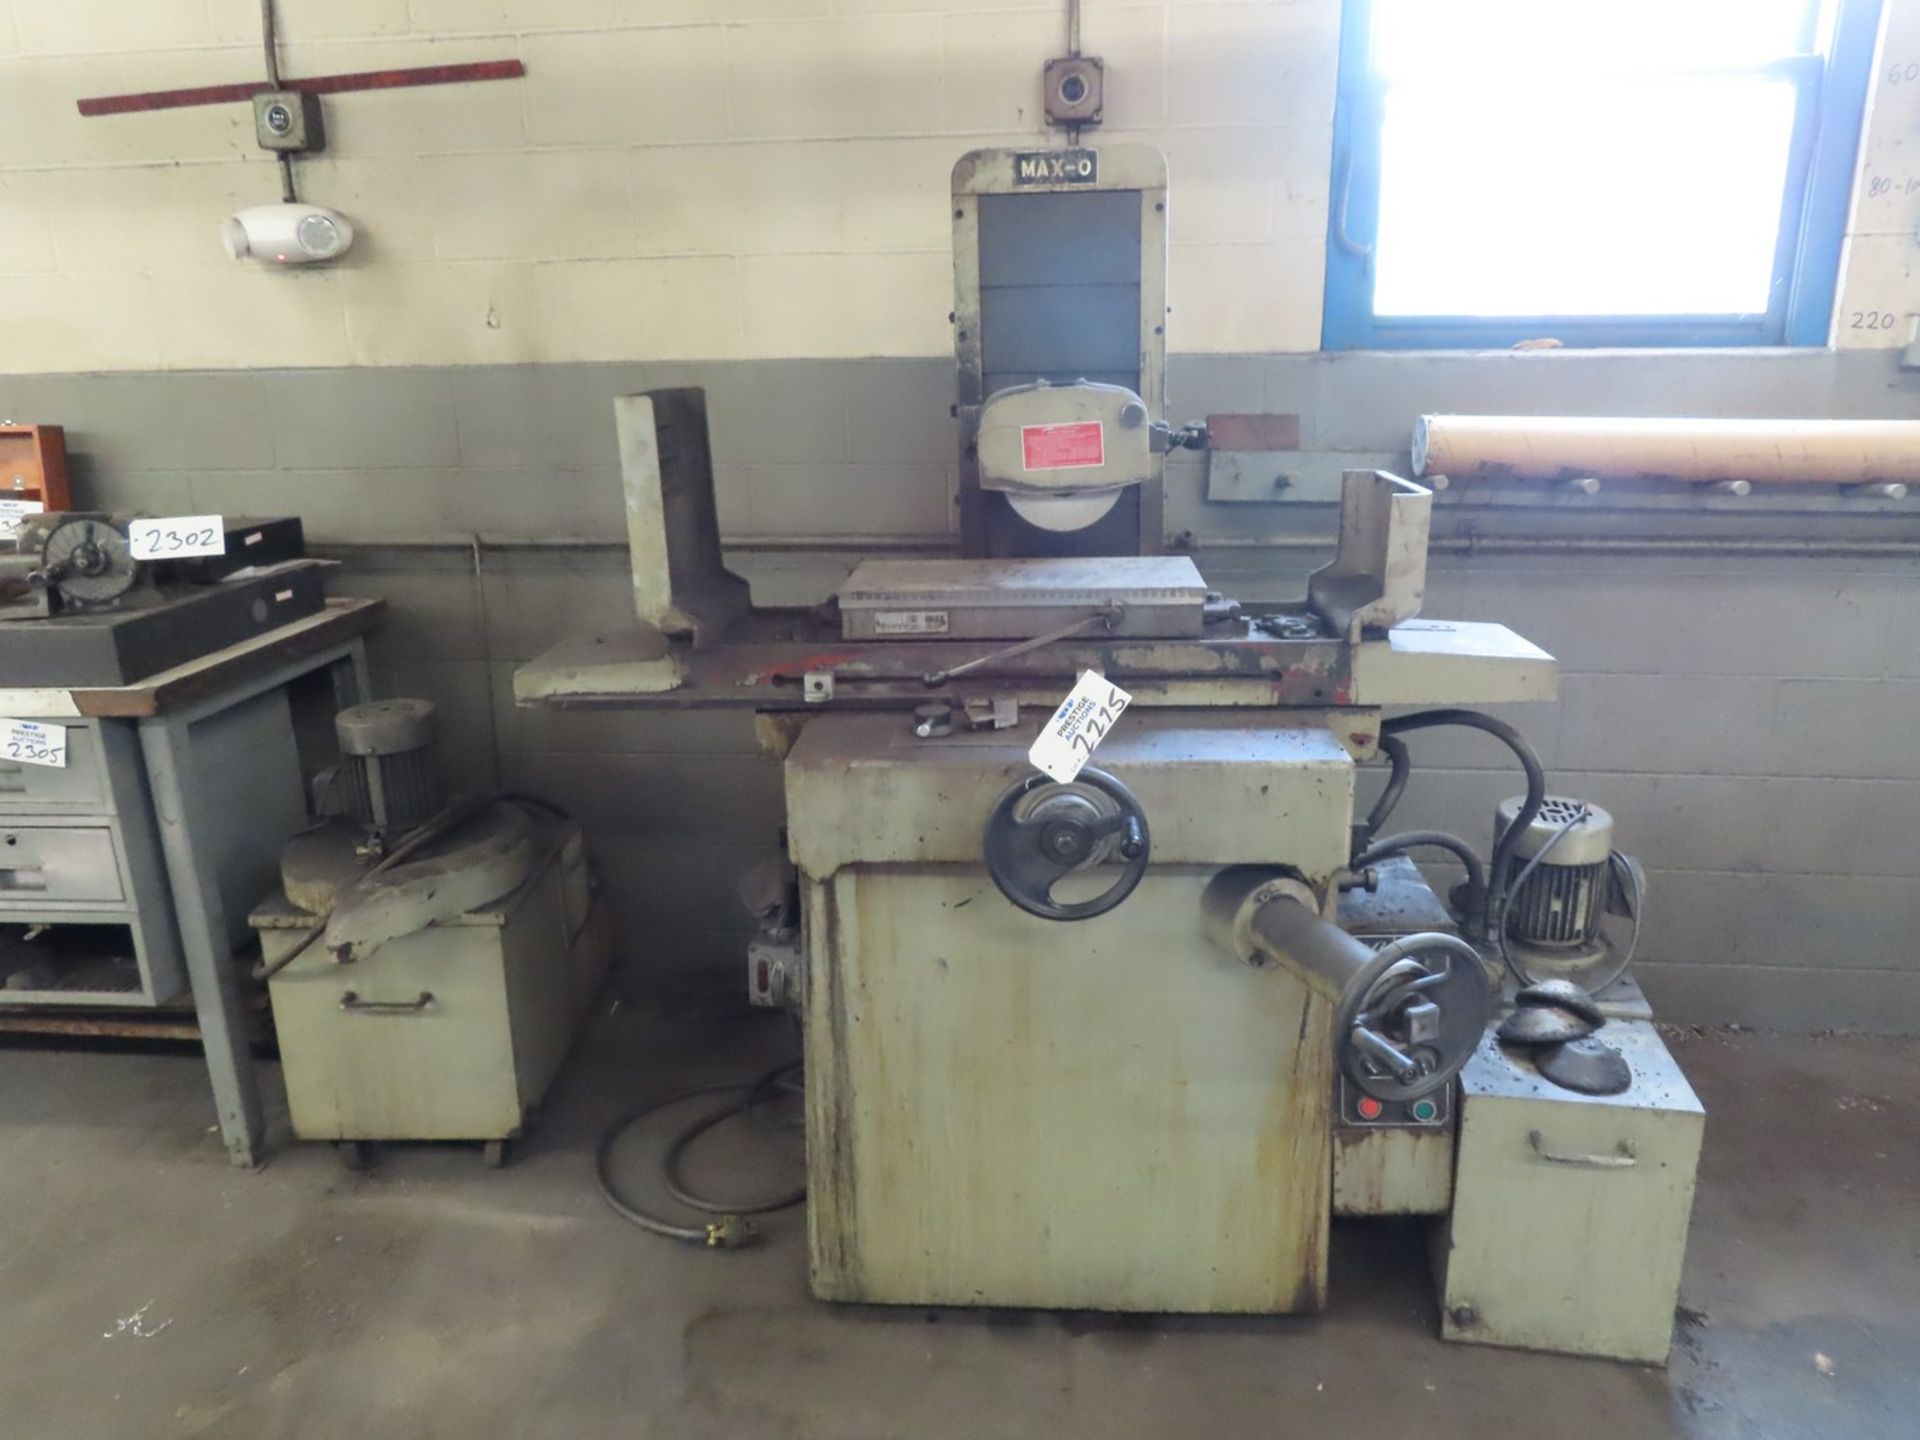 1979 Max-O KGS-250AH Auto Feed Surface Grinder